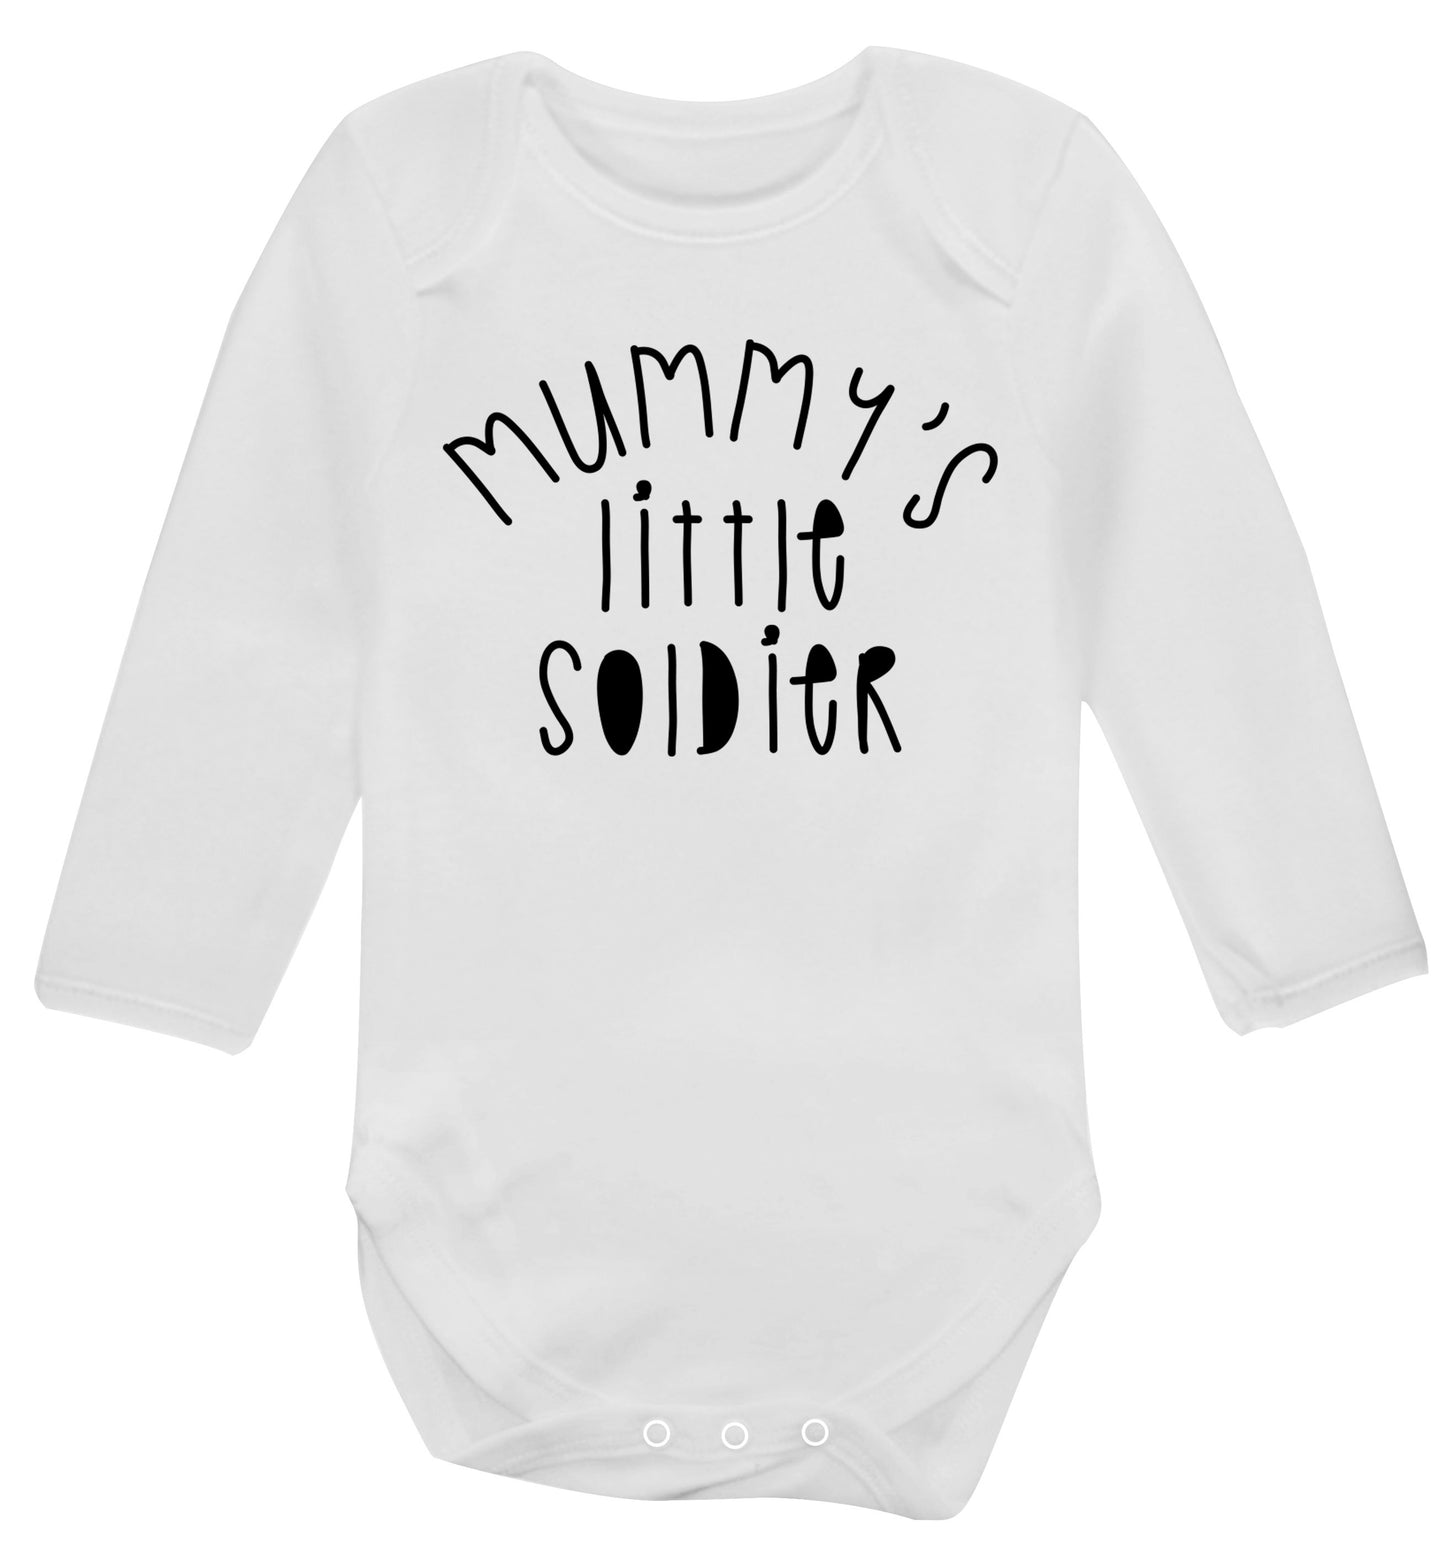 Mummy's little soldier Baby Vest long sleeved white 6-12 months